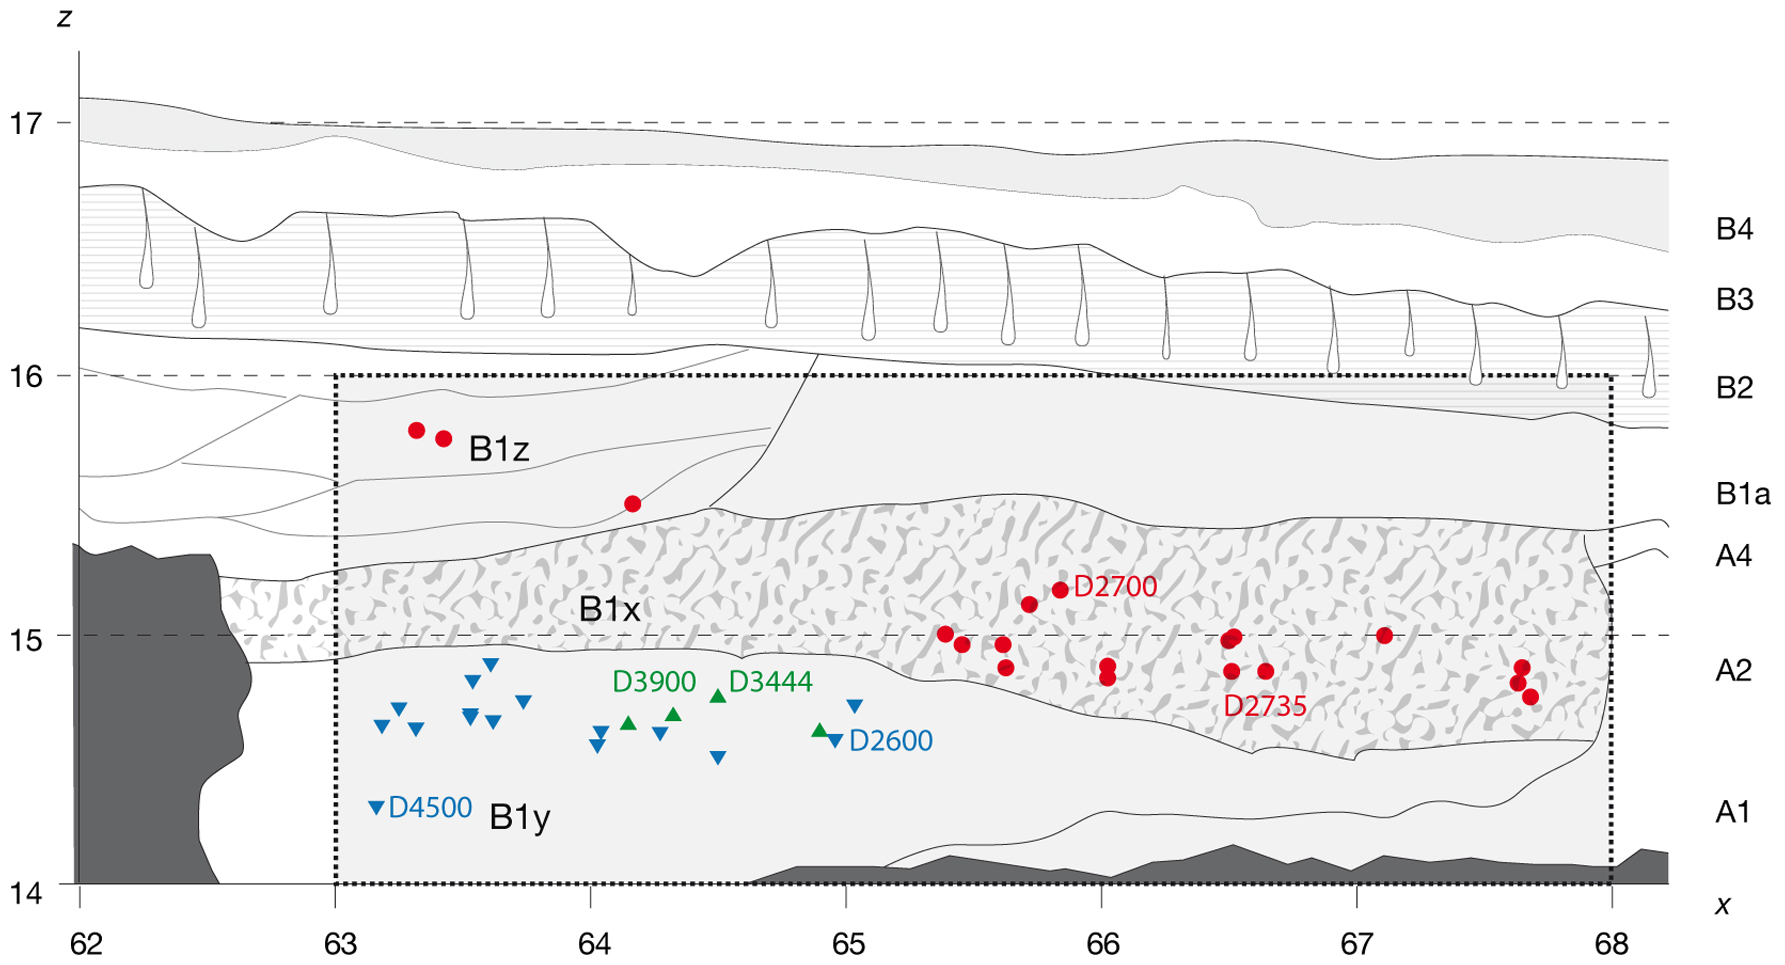 Figure 2 Projected stratigraphic location of the main hominin remains recovered from Block 2.